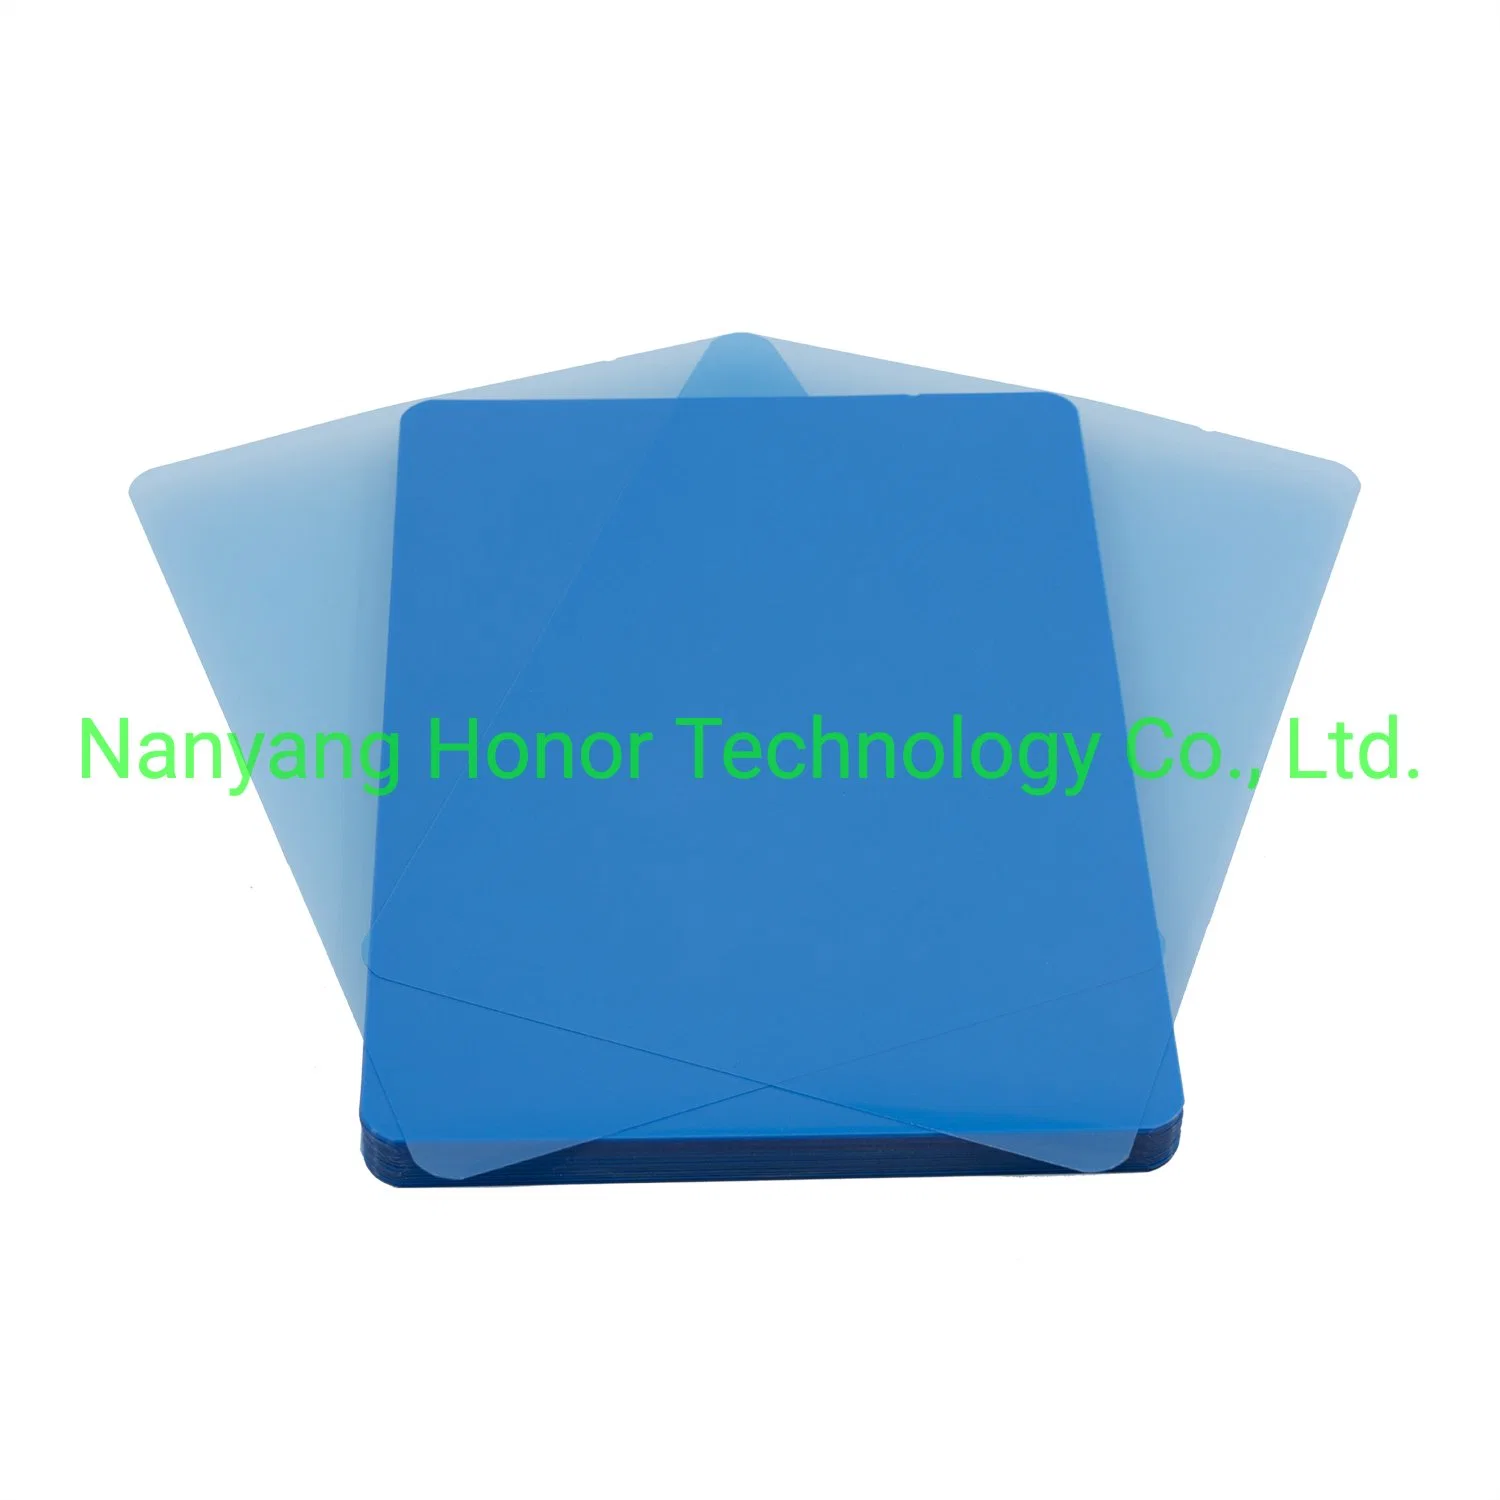 Inkjet Blue Film for Medical X-ray / Dental with Sheets or Rolls